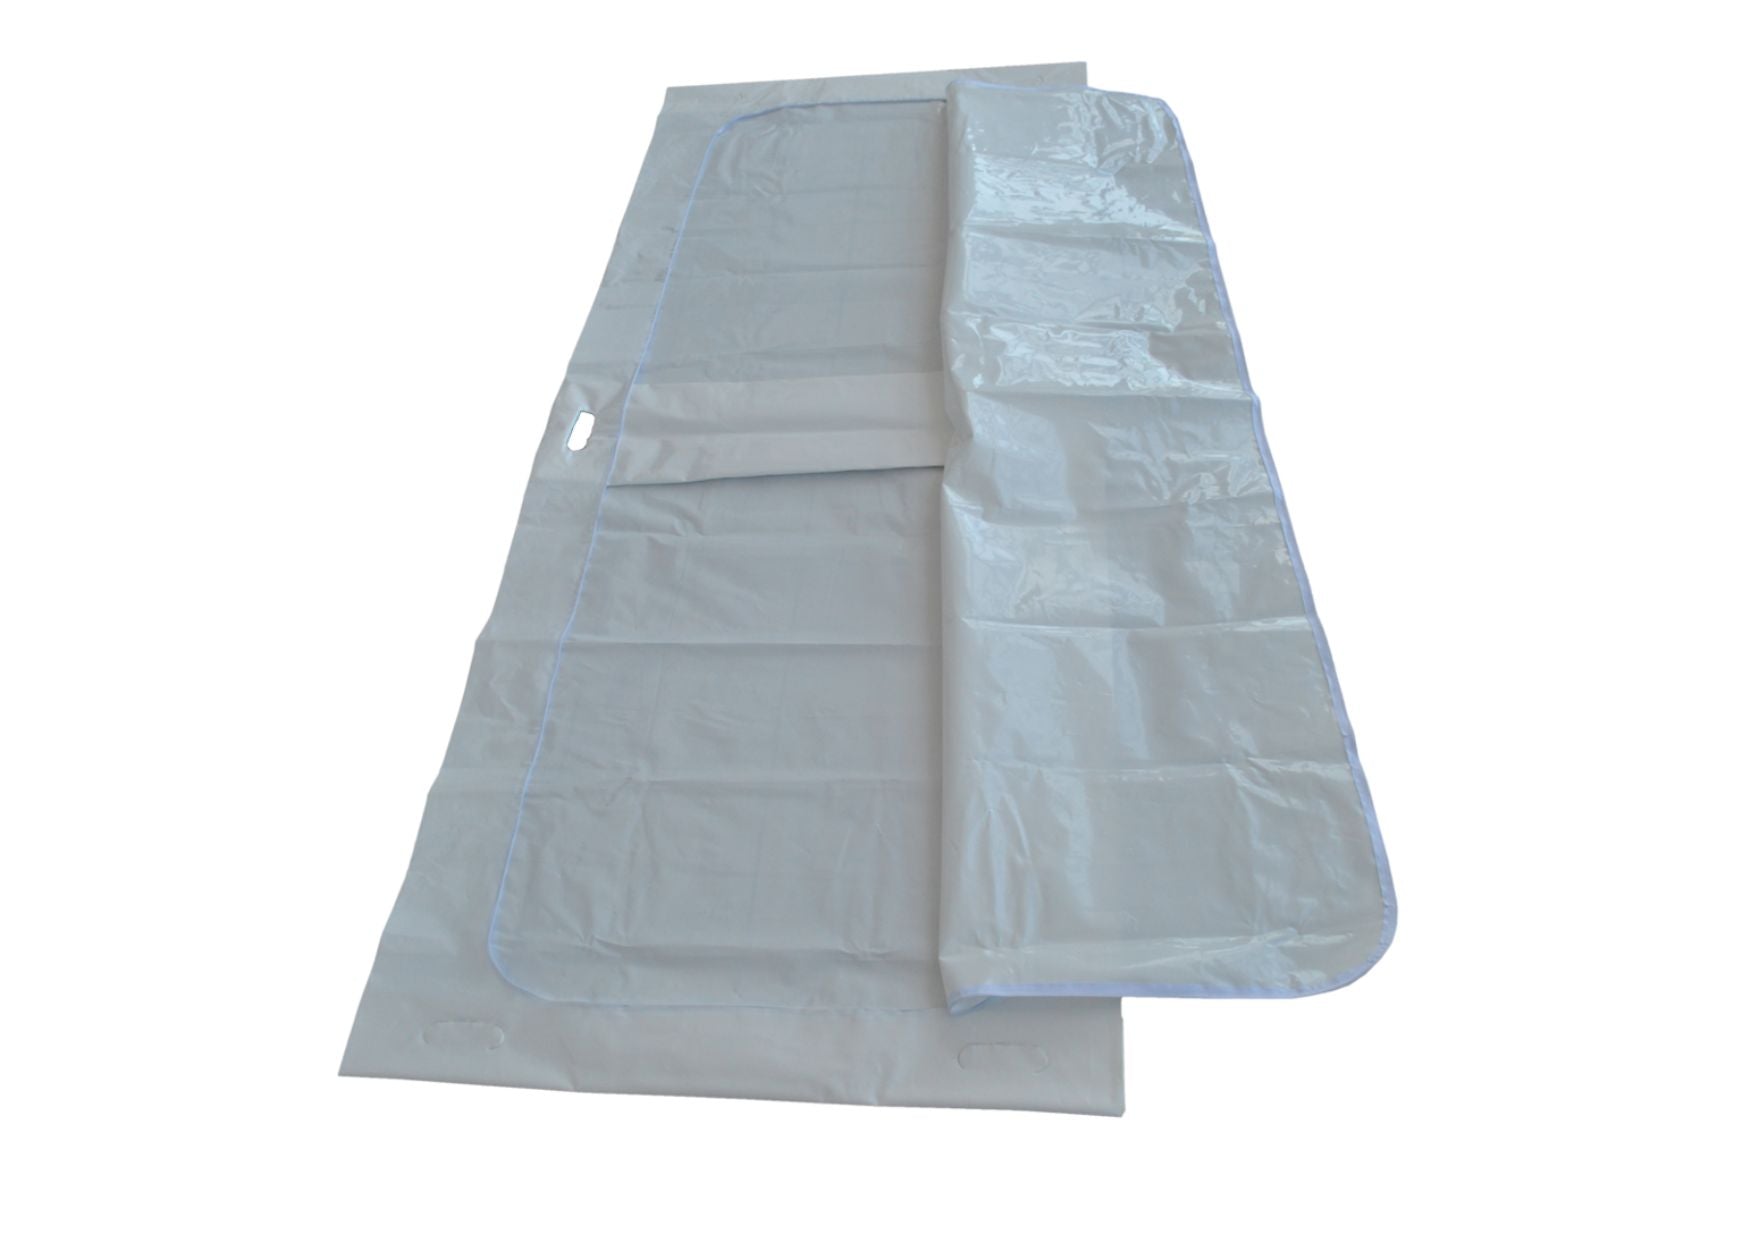 Casualty cover / body cover C-closure / 6 handles / up to approx. 170 KG